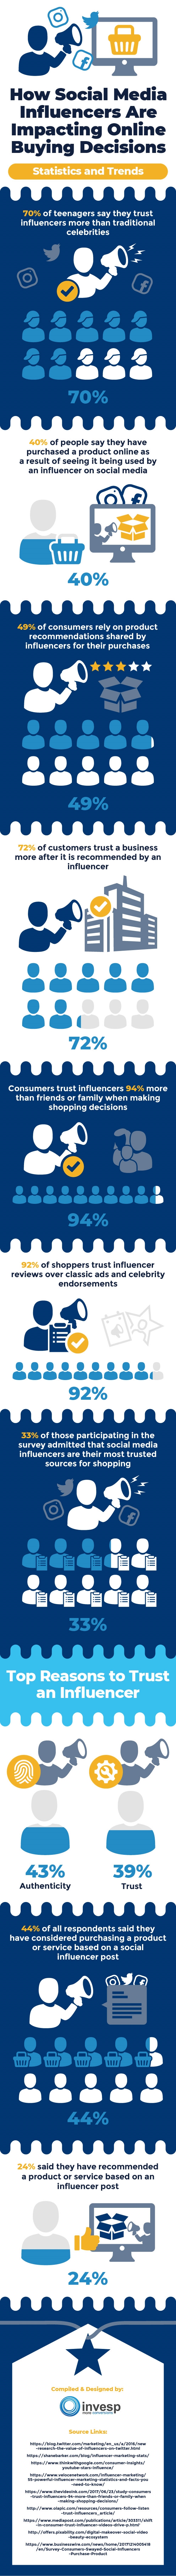 How Social Media Influencers Are Influencing Your Online Buying Decisions? [Infographic]